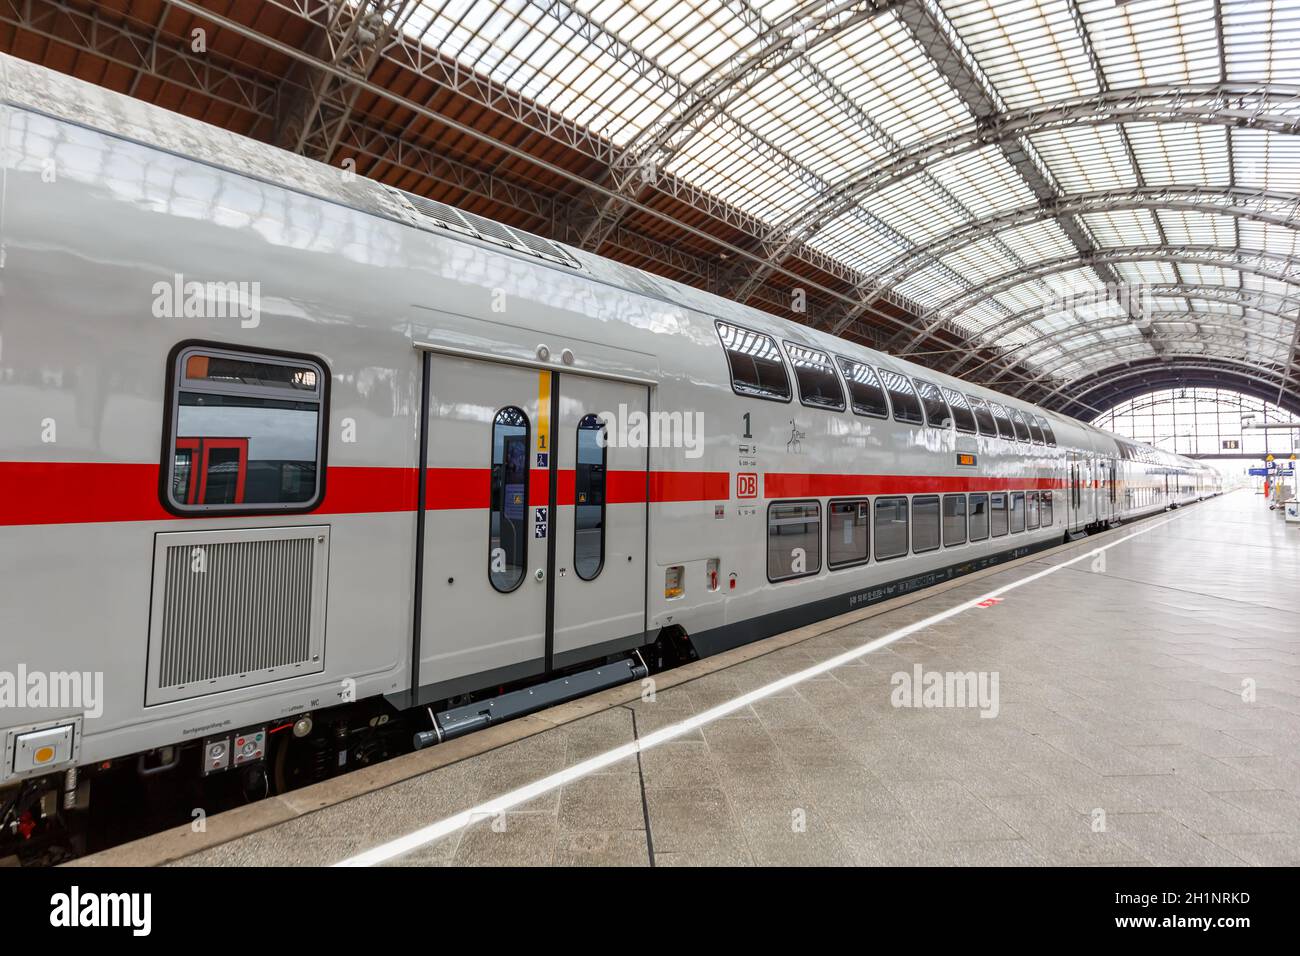 Leipzig, Germany - August 19, 2020: IC2 Intercity 2 double-deck train at Leipzig main station railway in Germany. Stock Photo